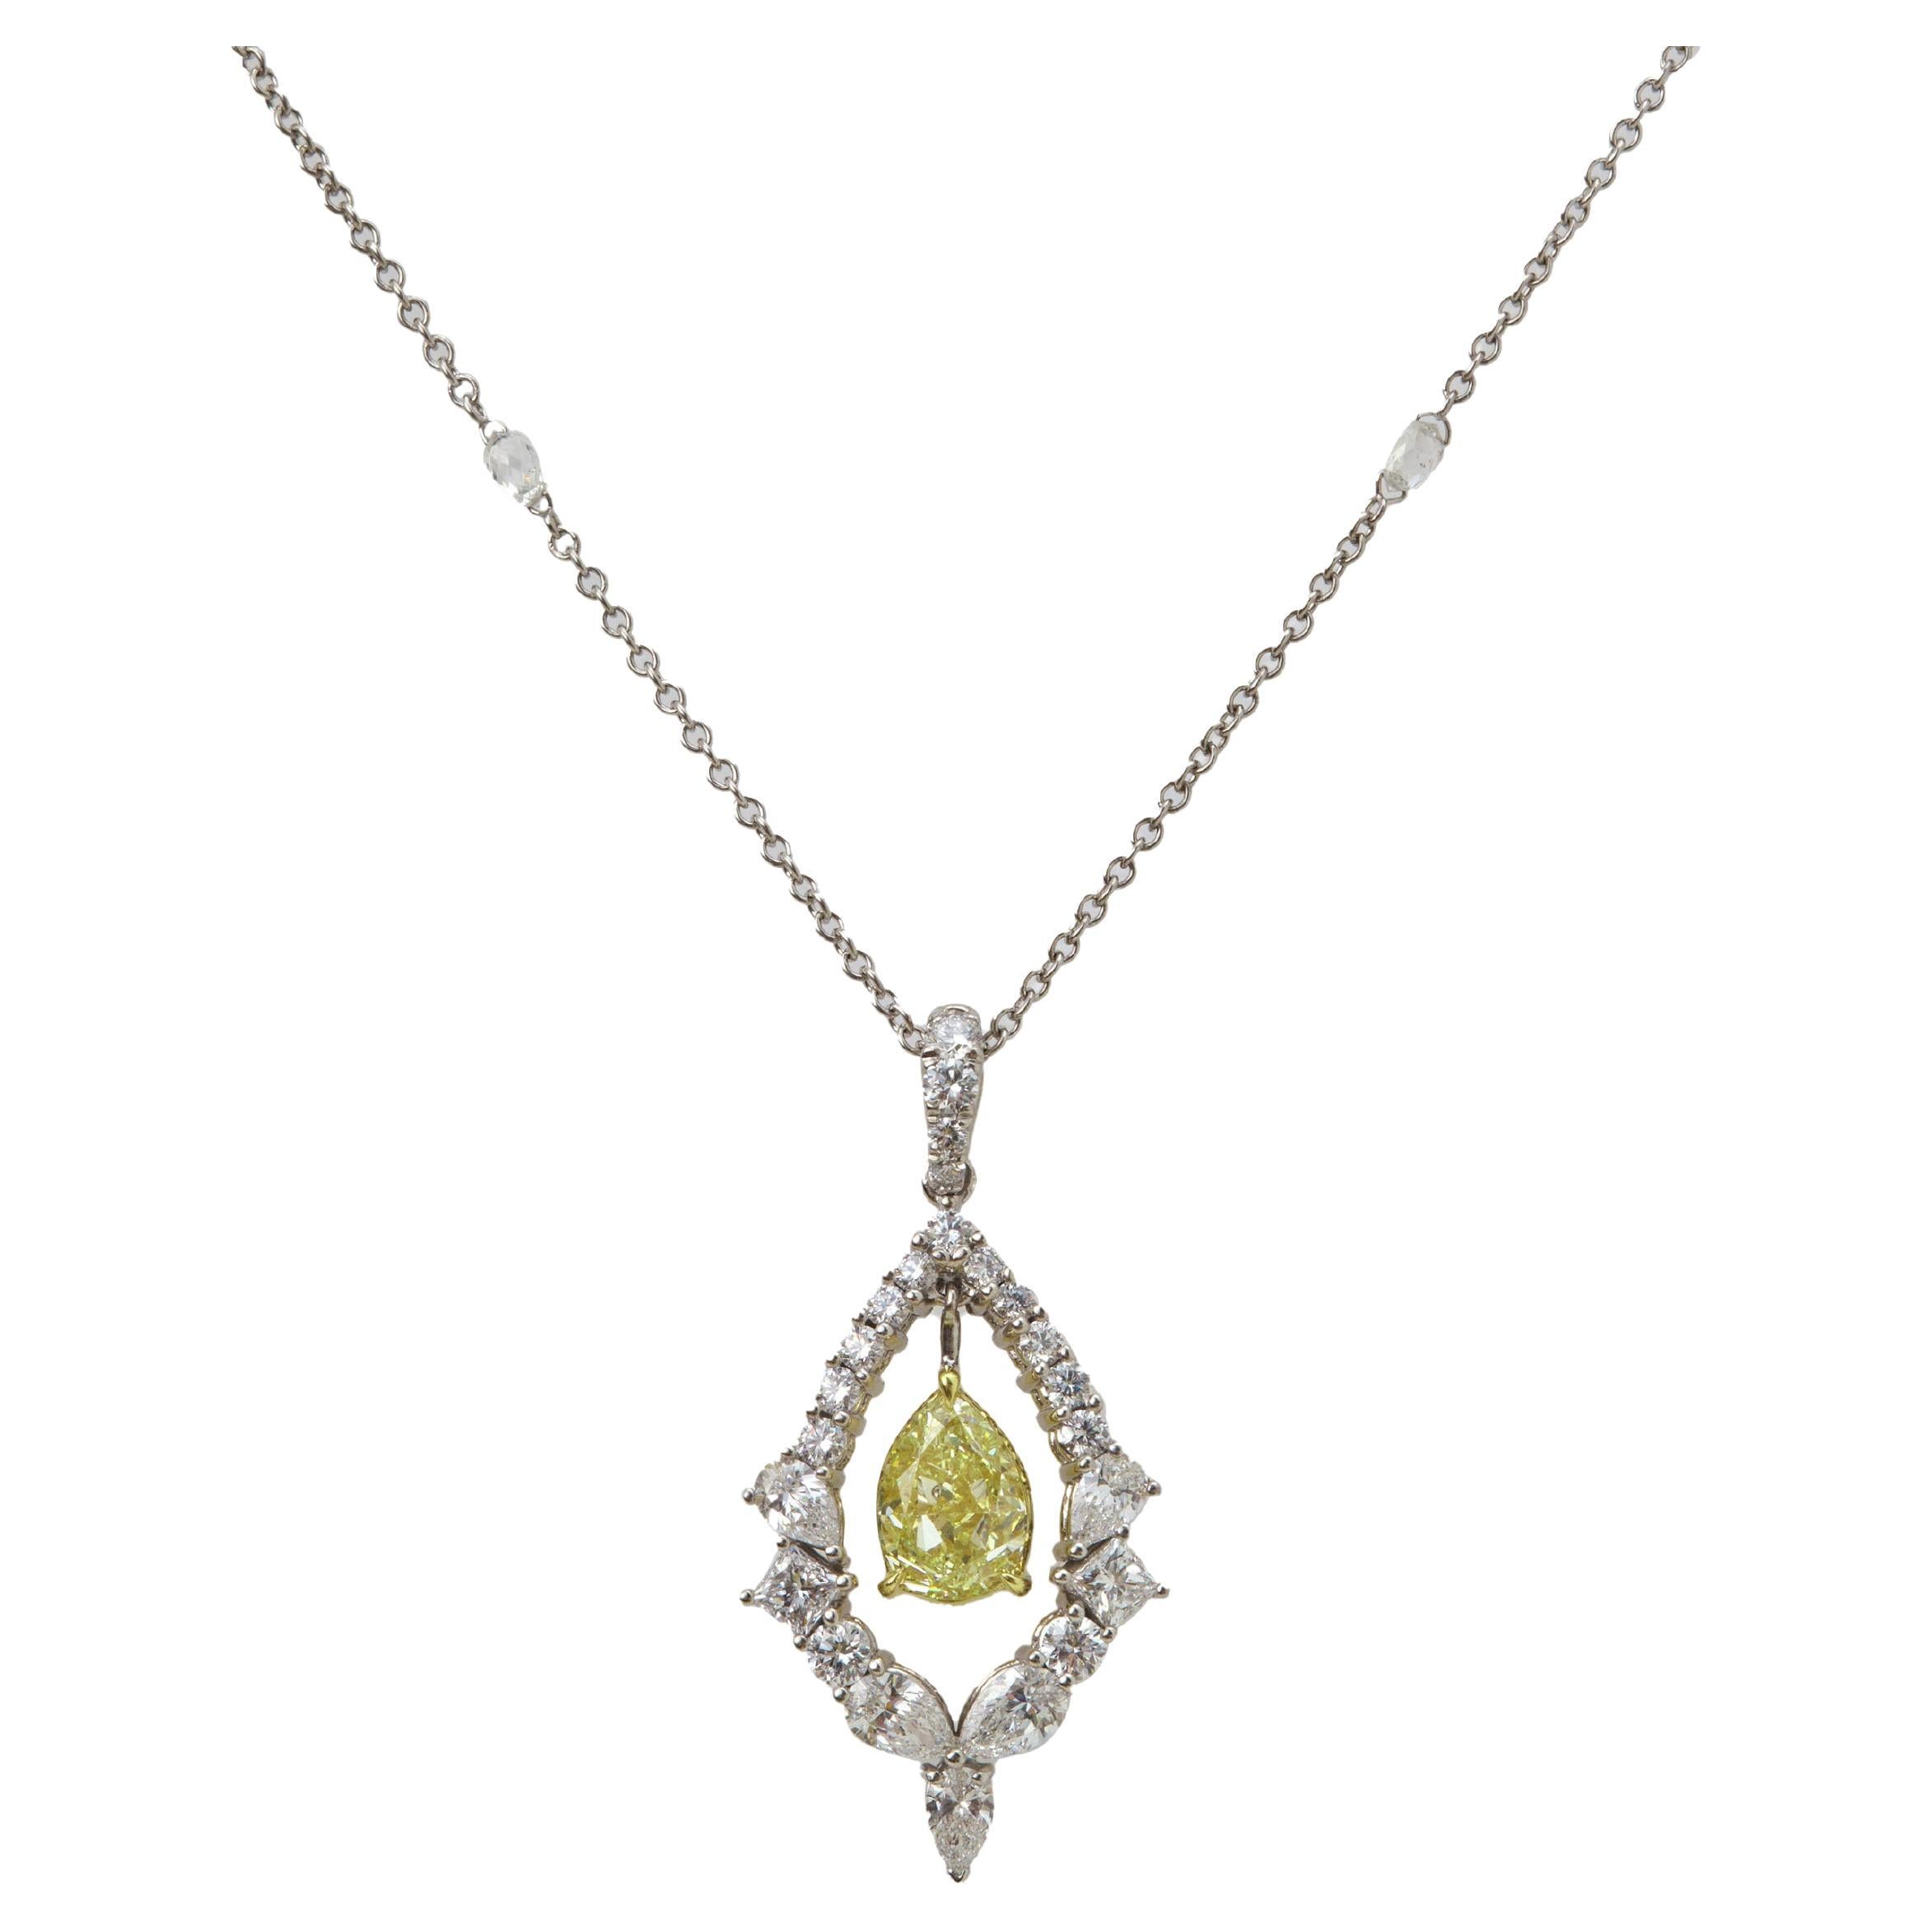 6.93 Carat Fancy Yellow and White Diamond  Necklace 18K White Gold GIA Certified For Sale